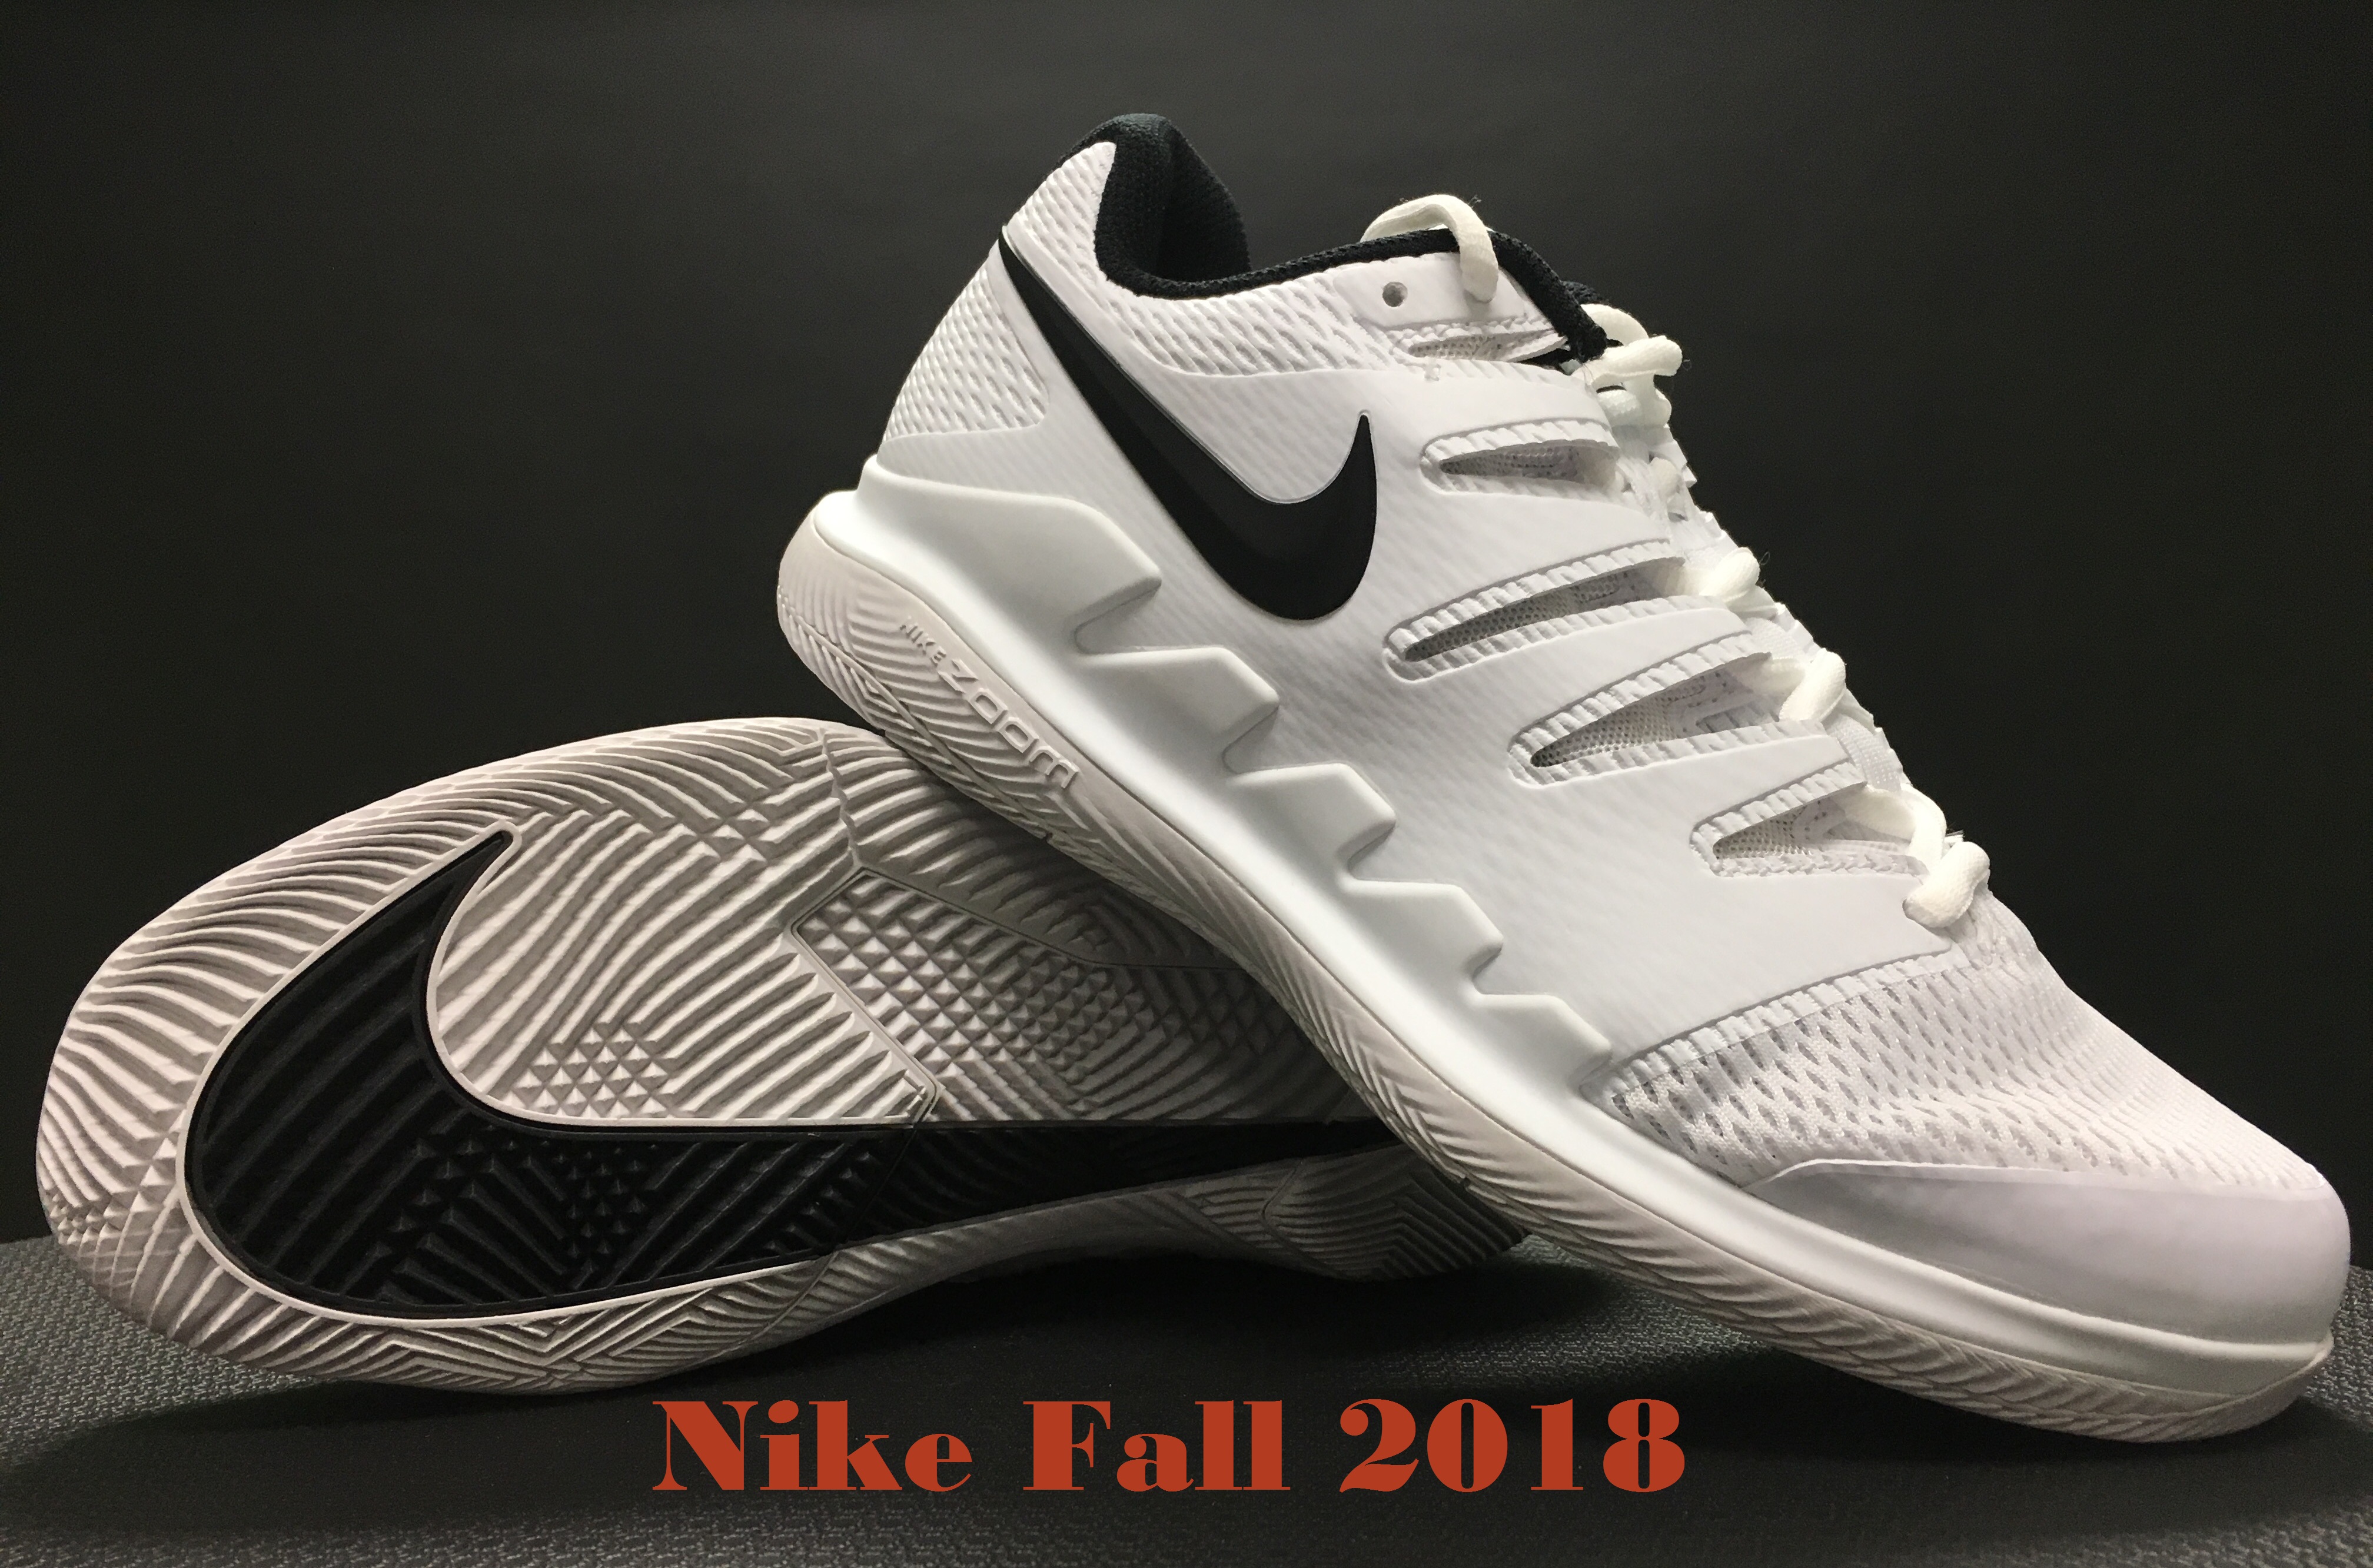 Nike Fall 2018 Tennis Shoes May Feature 